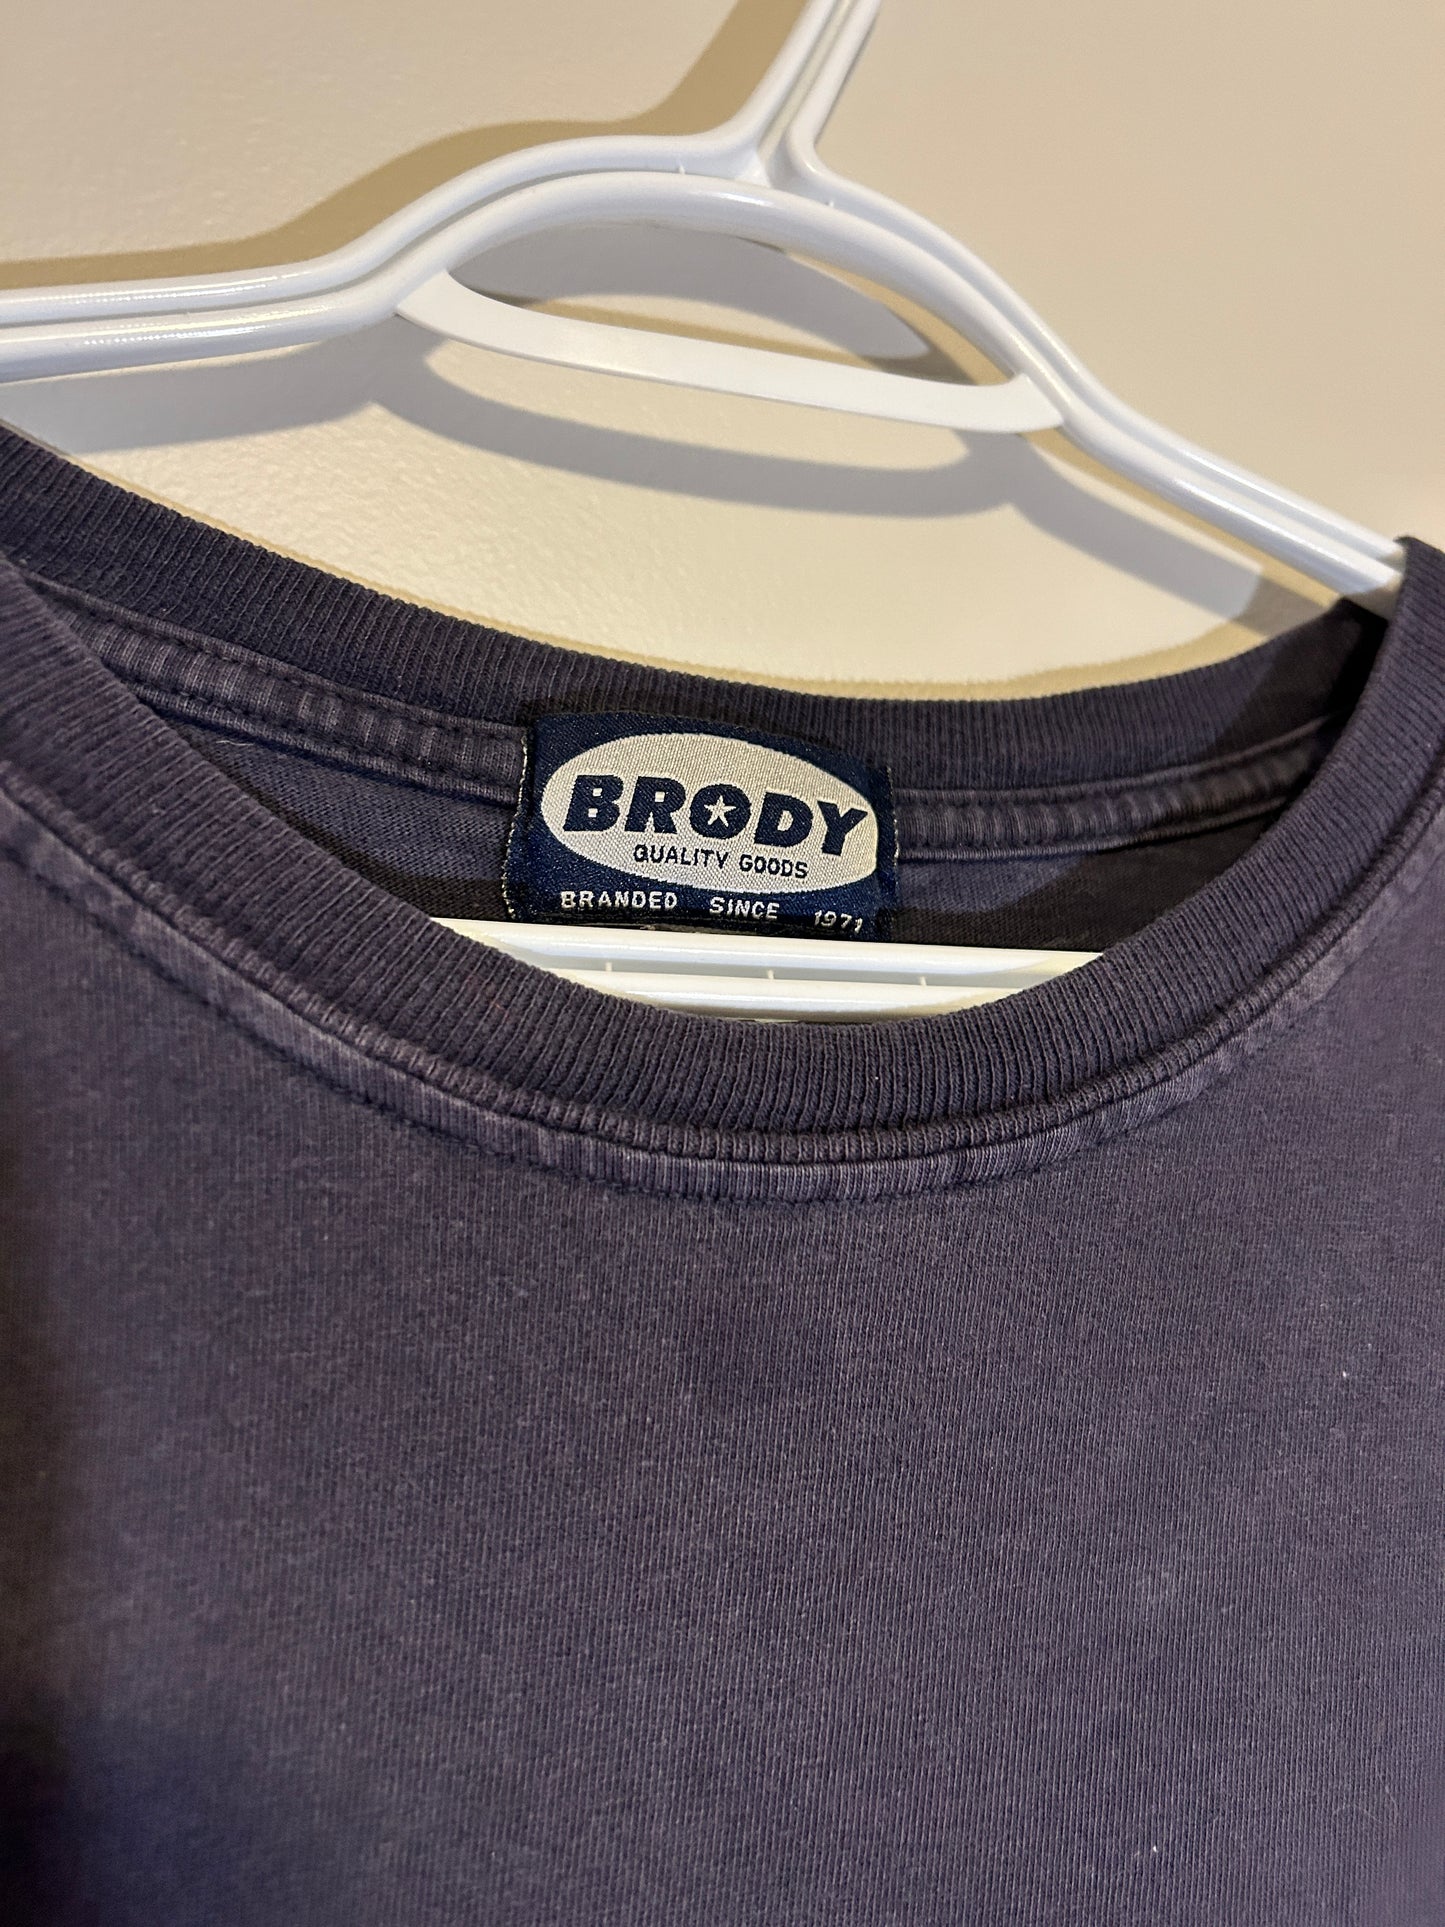 Vintage Faded Brody Jeans Tee (XL)